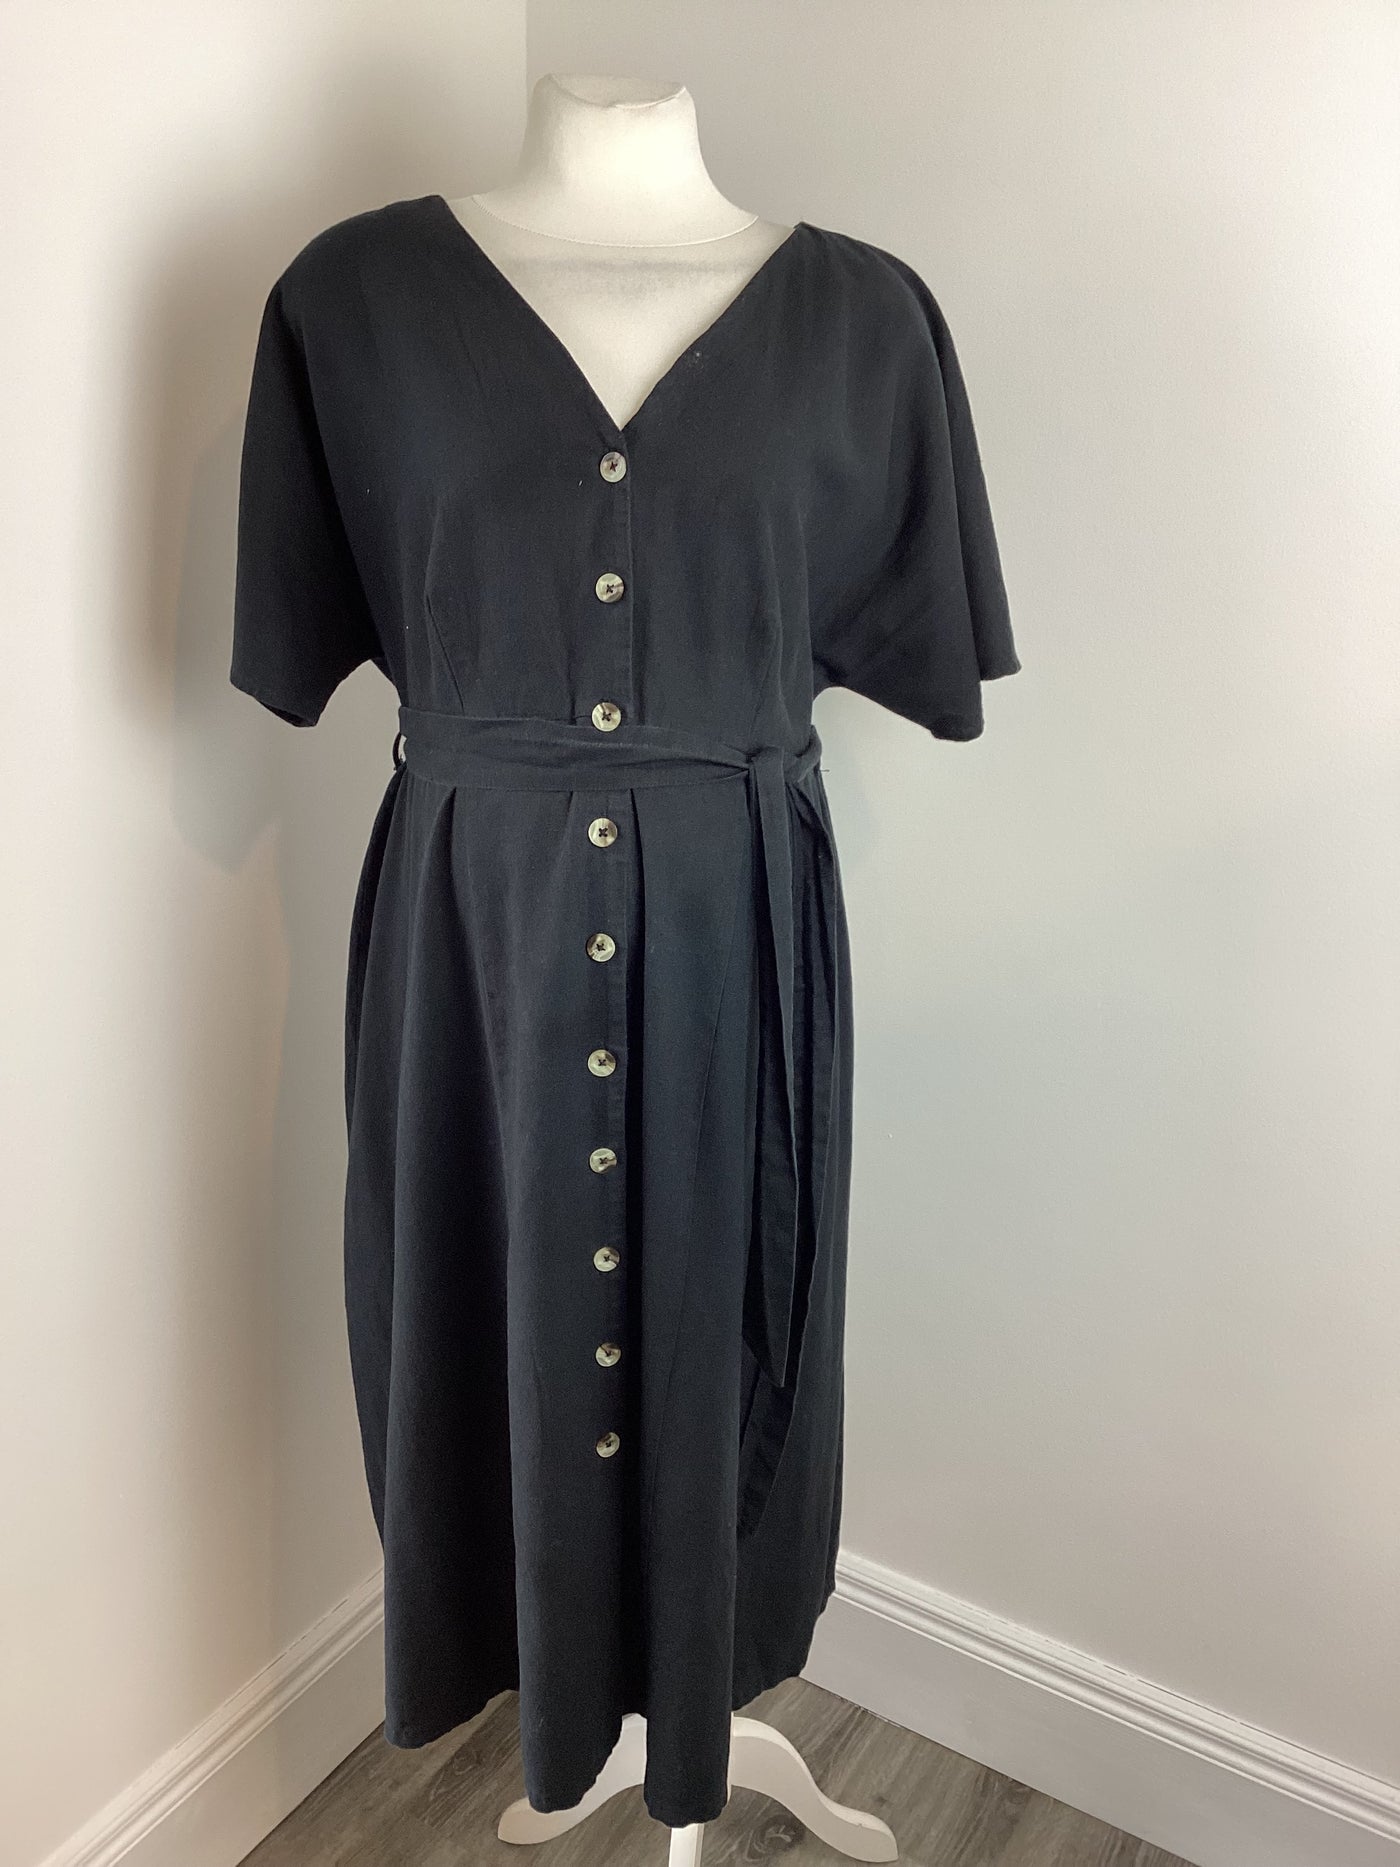 George Maternity black button front dress with waist tie - Size 16